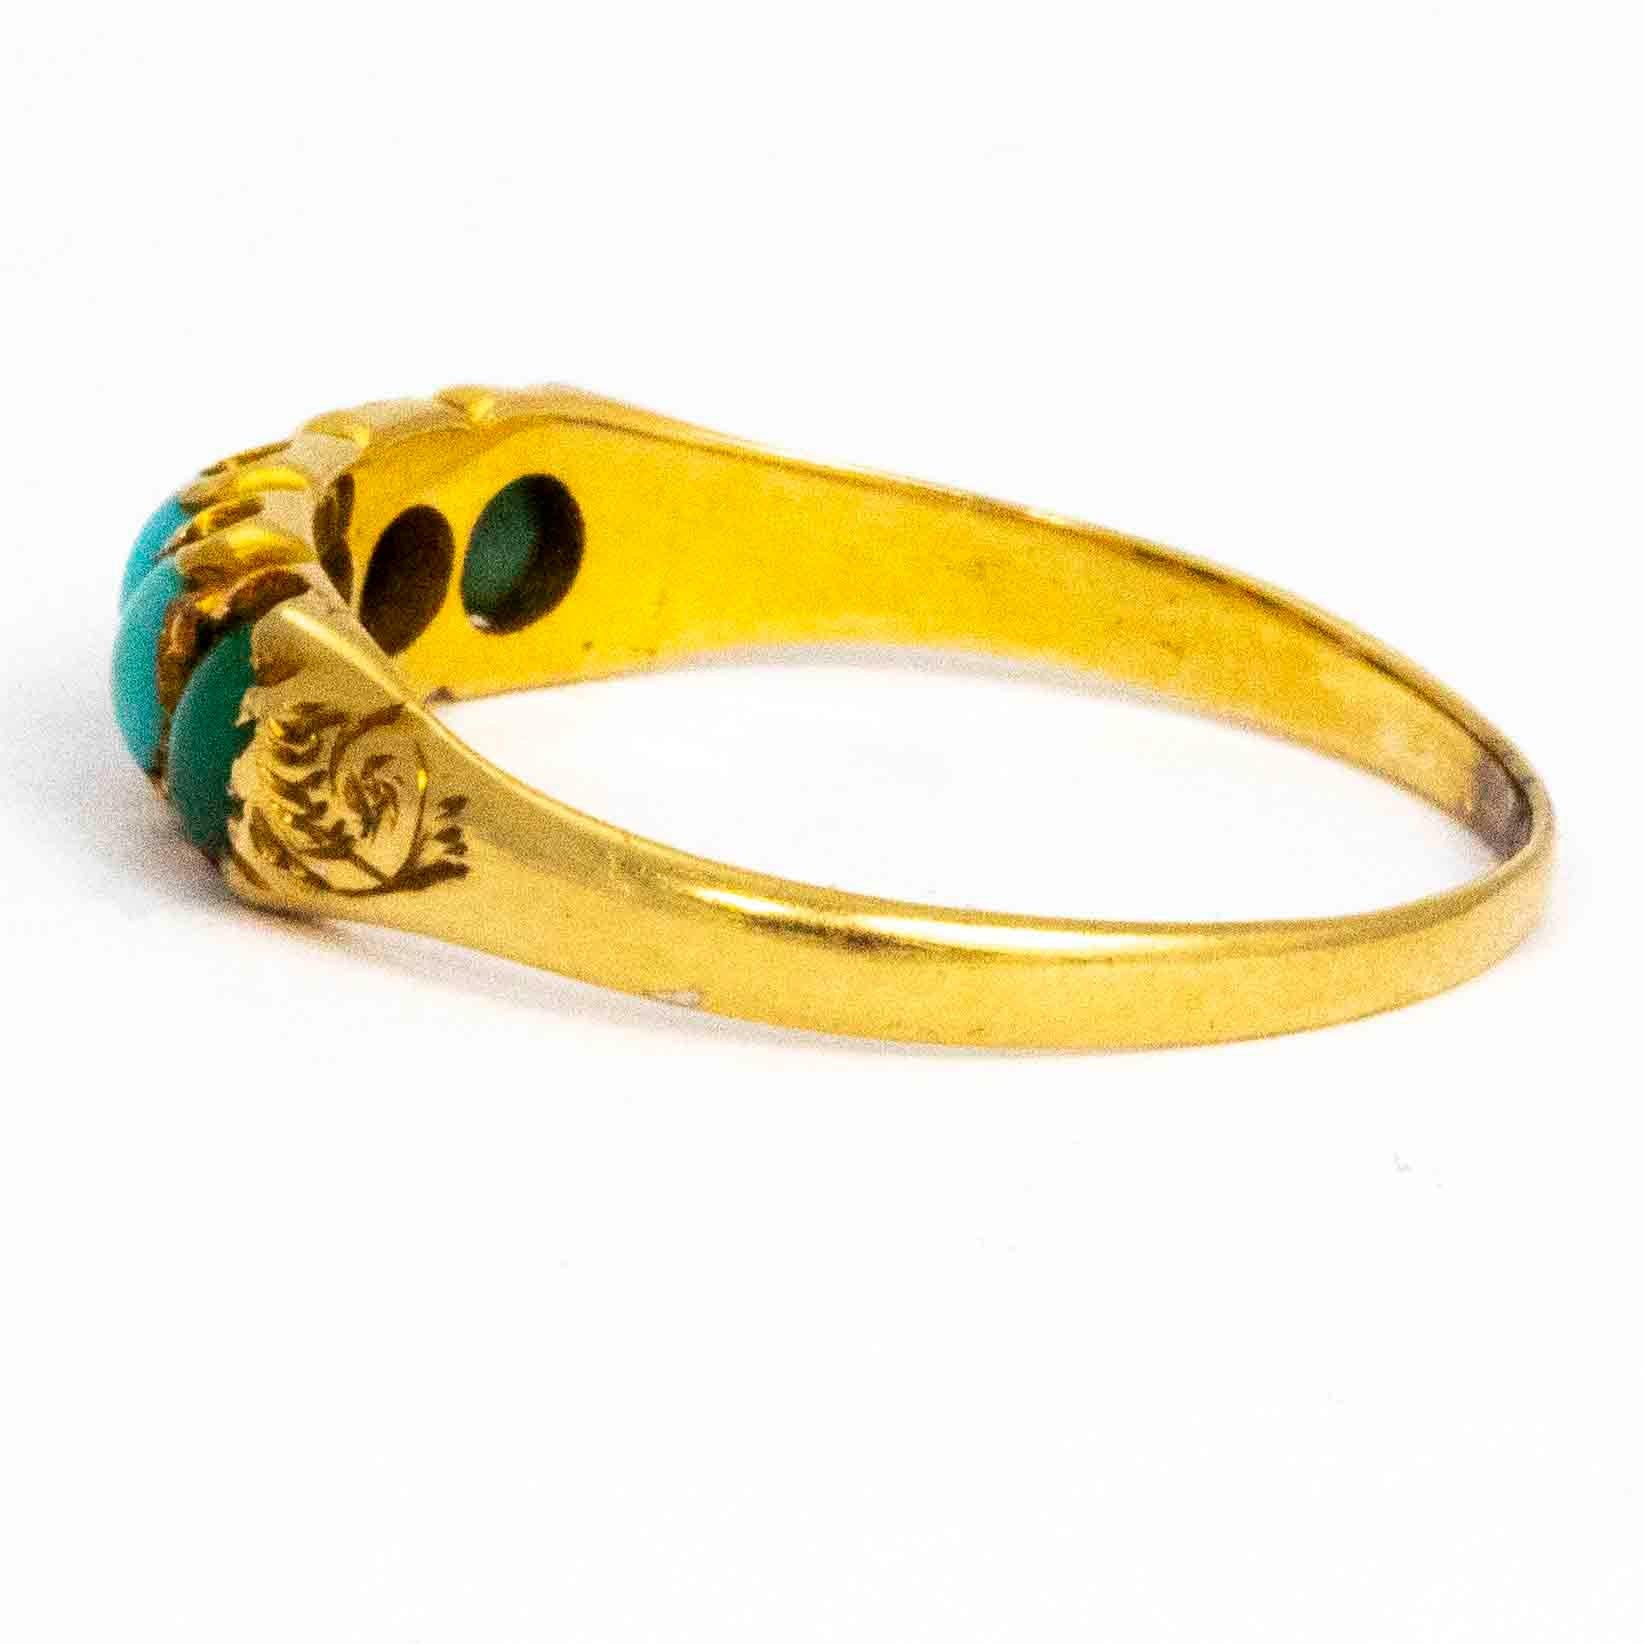 This ring is made in the late victorian era and the pop of the blue stones look stunning next to the yellow gold. The five turquoise stones in this ring are held in an ornate setting and pretty engraved shoulders. The ring is modelled in 15ct